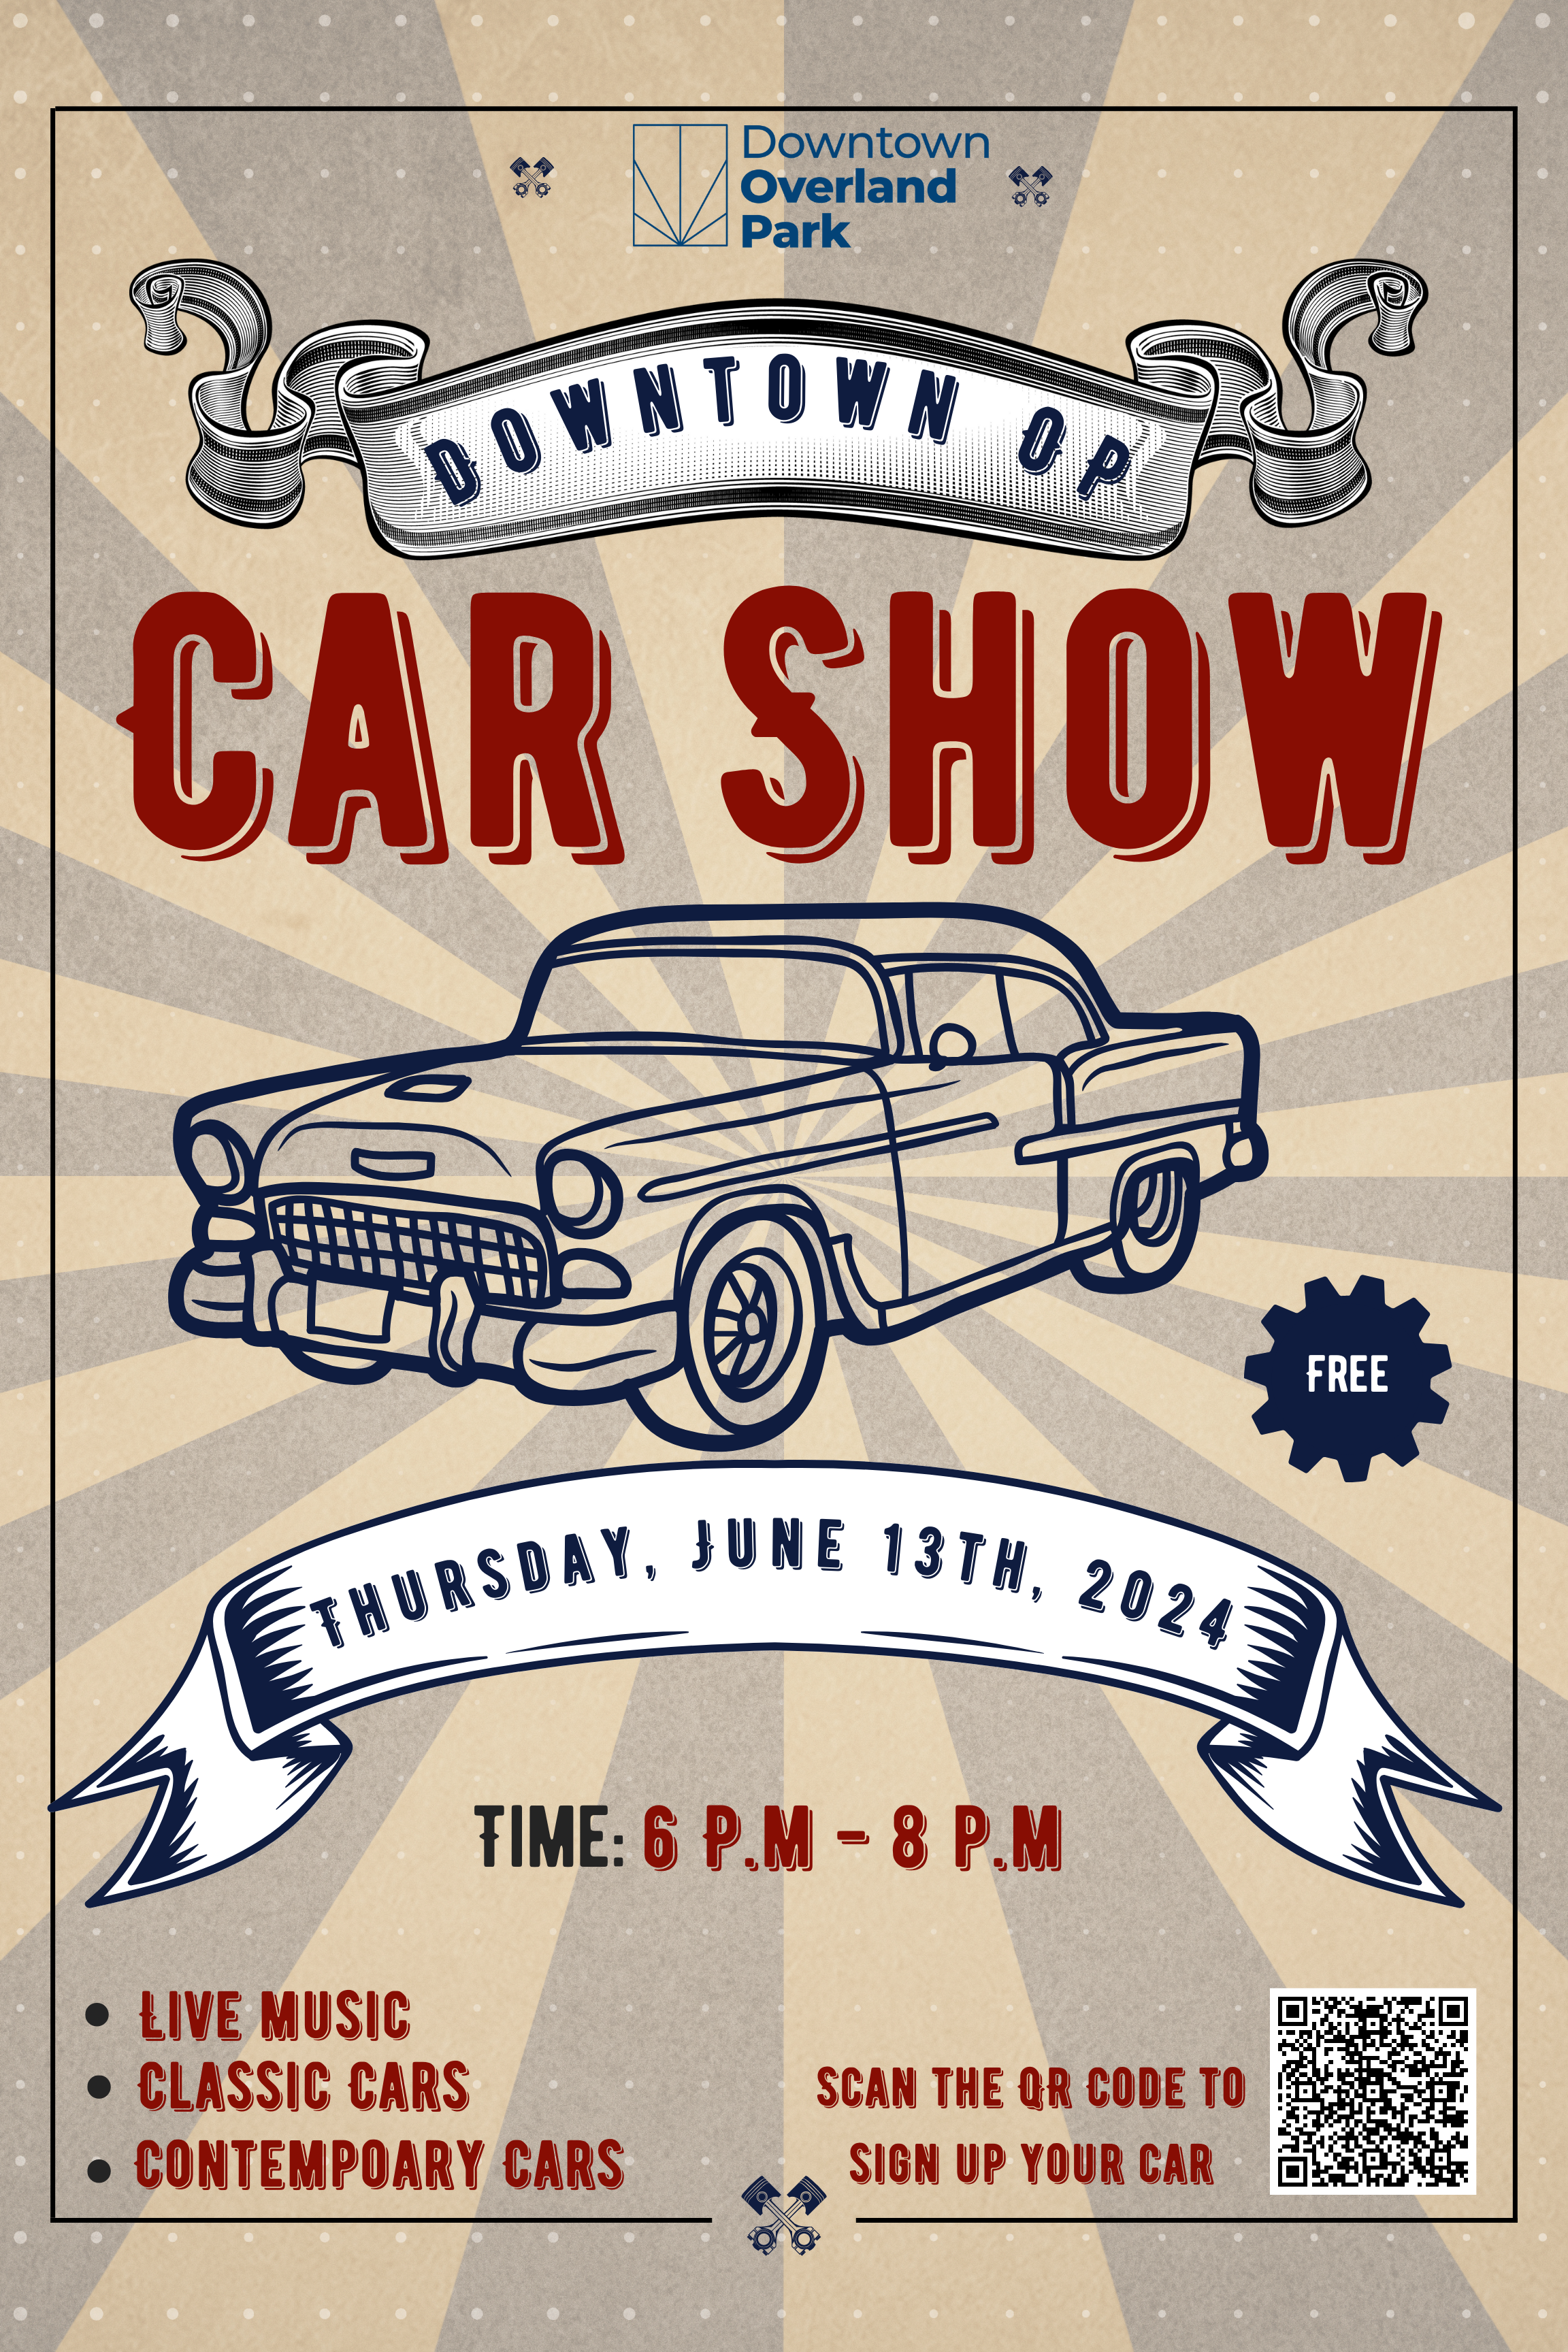 This is an image of car show poster